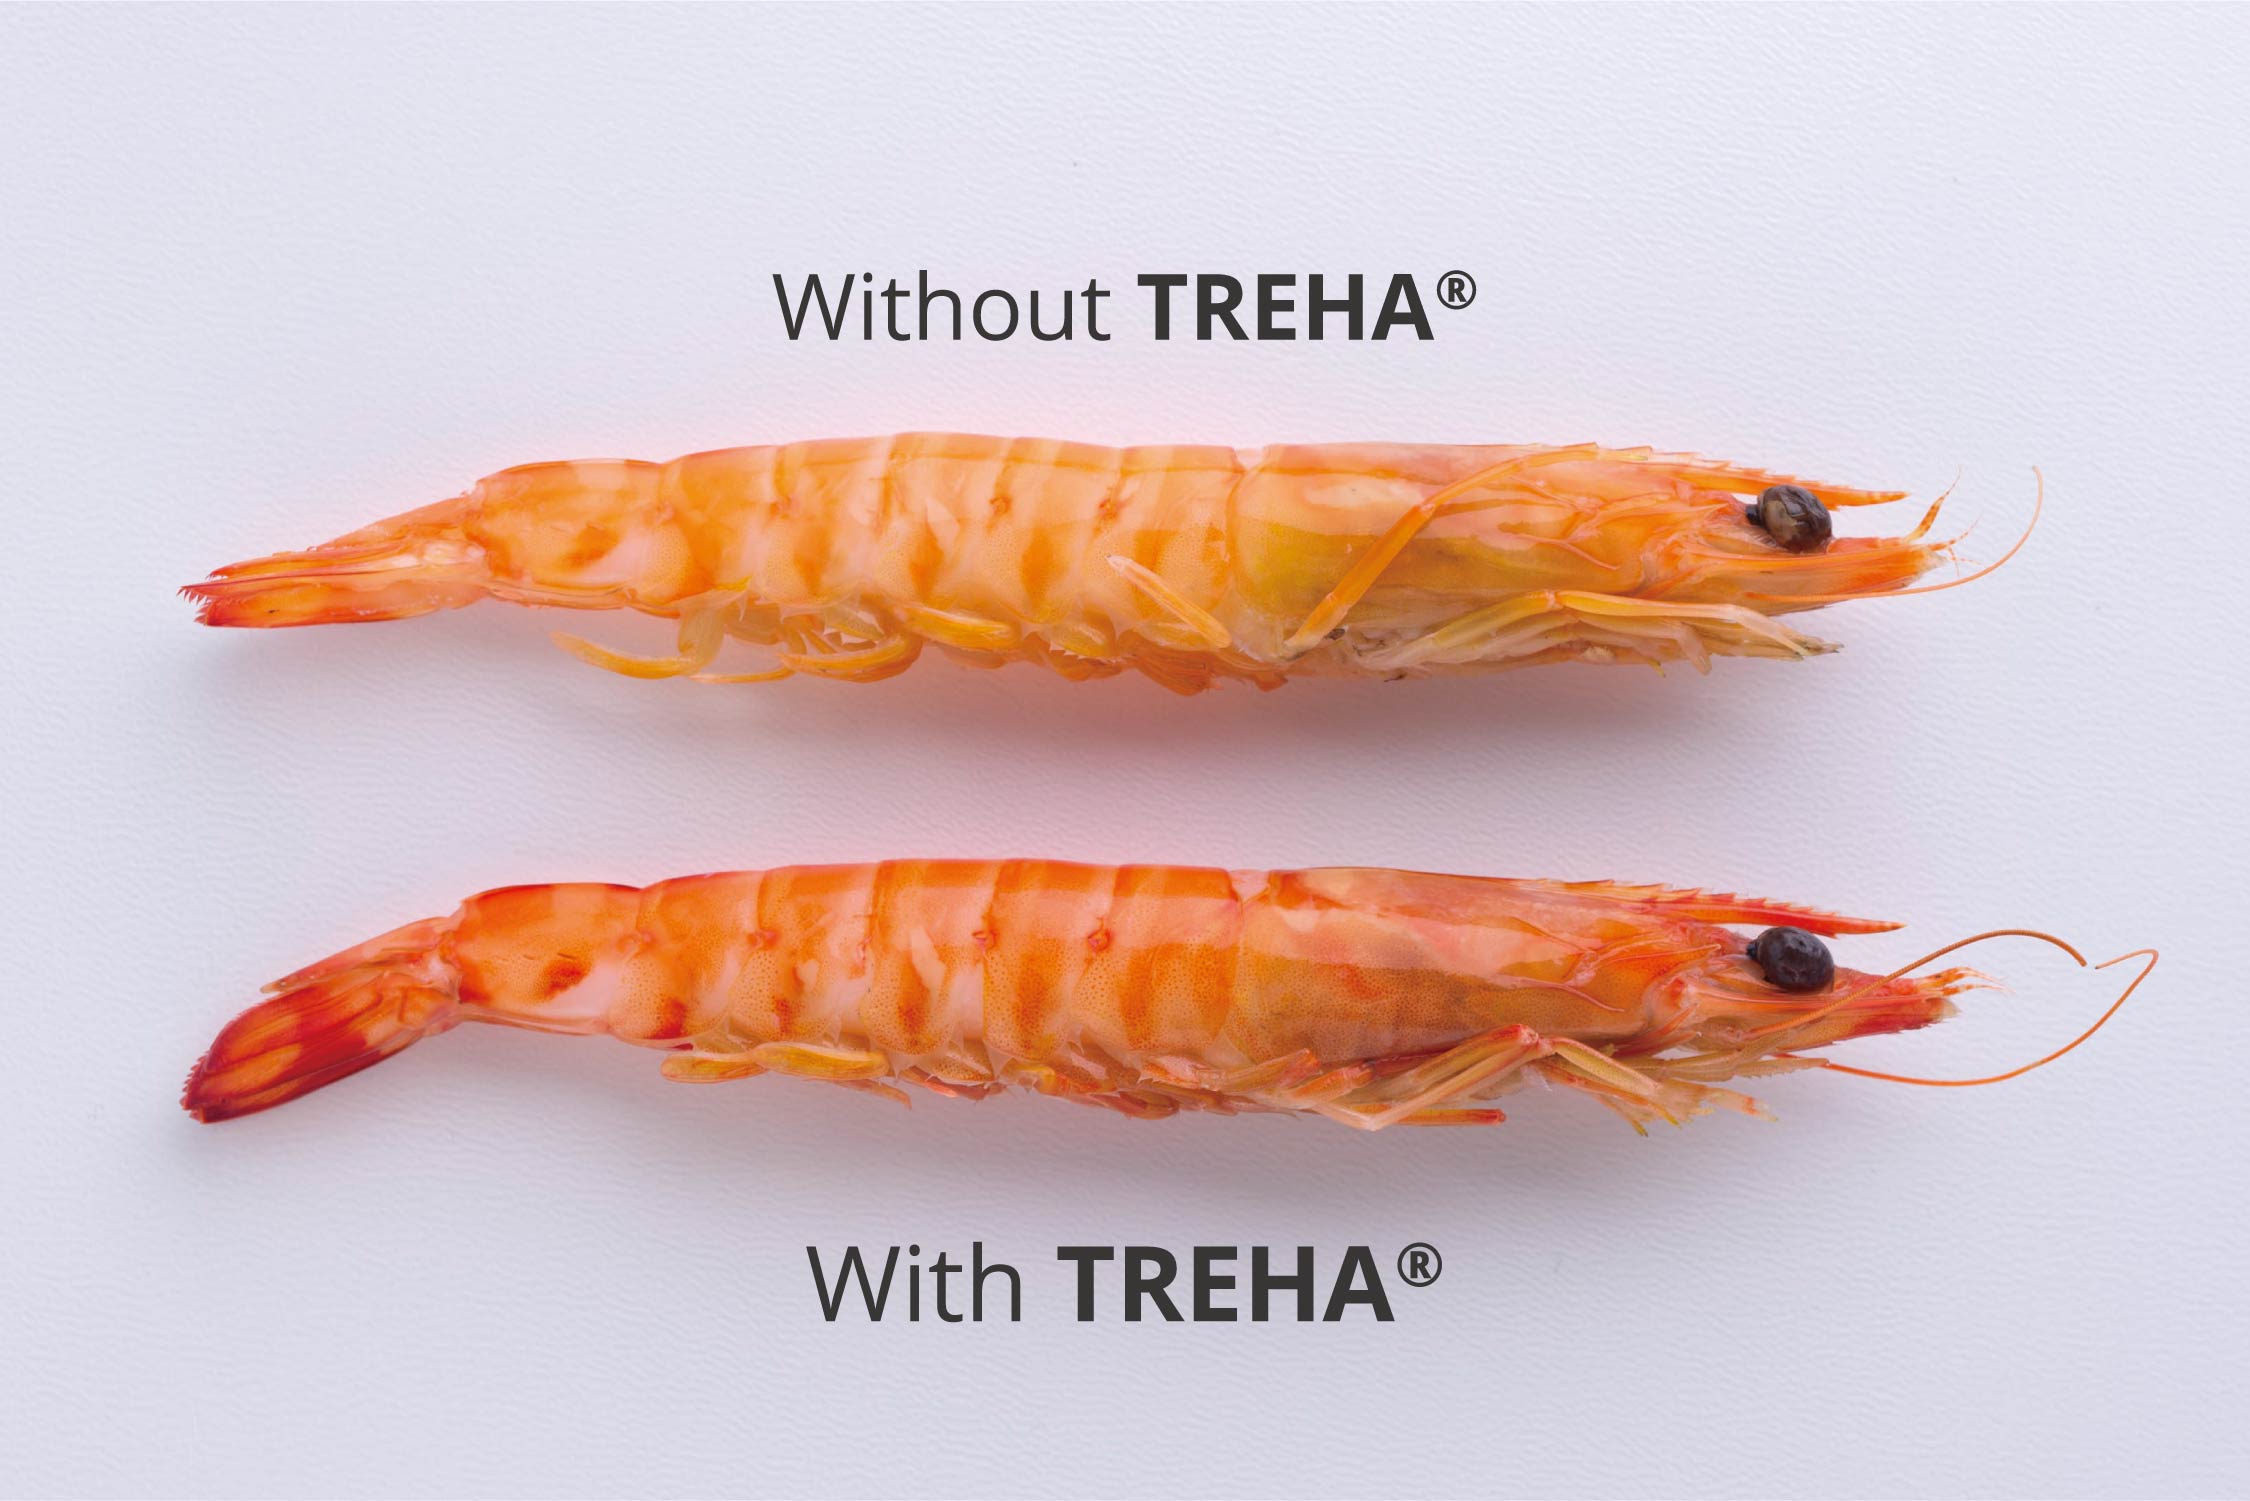 Prawns cooked in 2 liters of water with 25g of salt and 50g of TREHA present vivid and glossy shells.